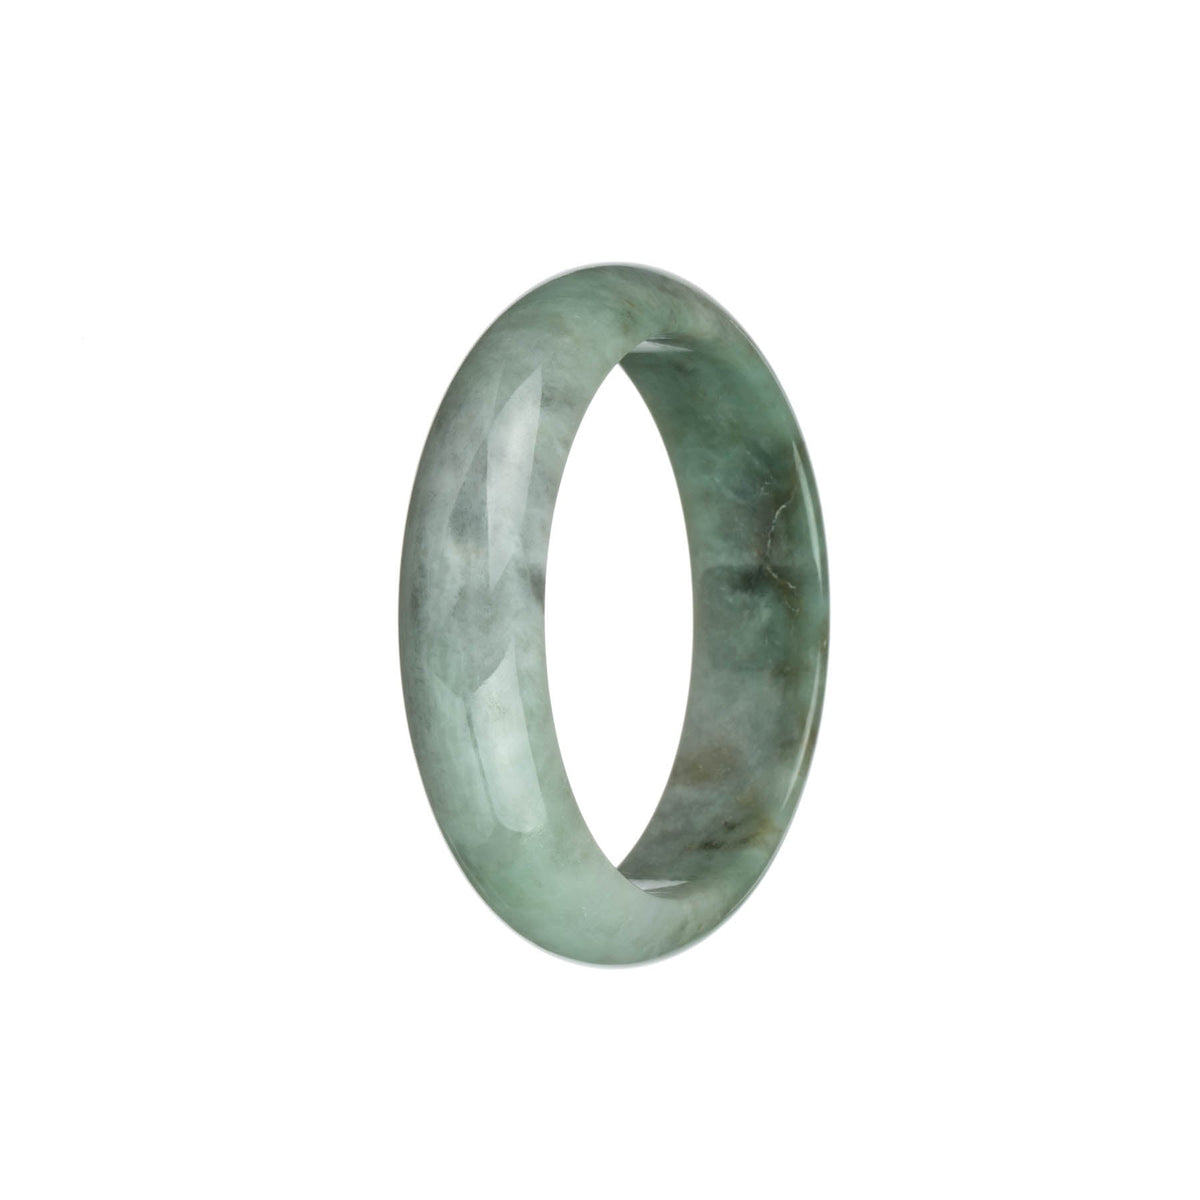 A close-up photo of a traditional jade bangle with a mix of green and light grey colors, featuring a unique brown patch. The bangle has a half-moon shape and measures 53mm in diameter. It is a genuine Type A jade piece and is sold by MAYS.